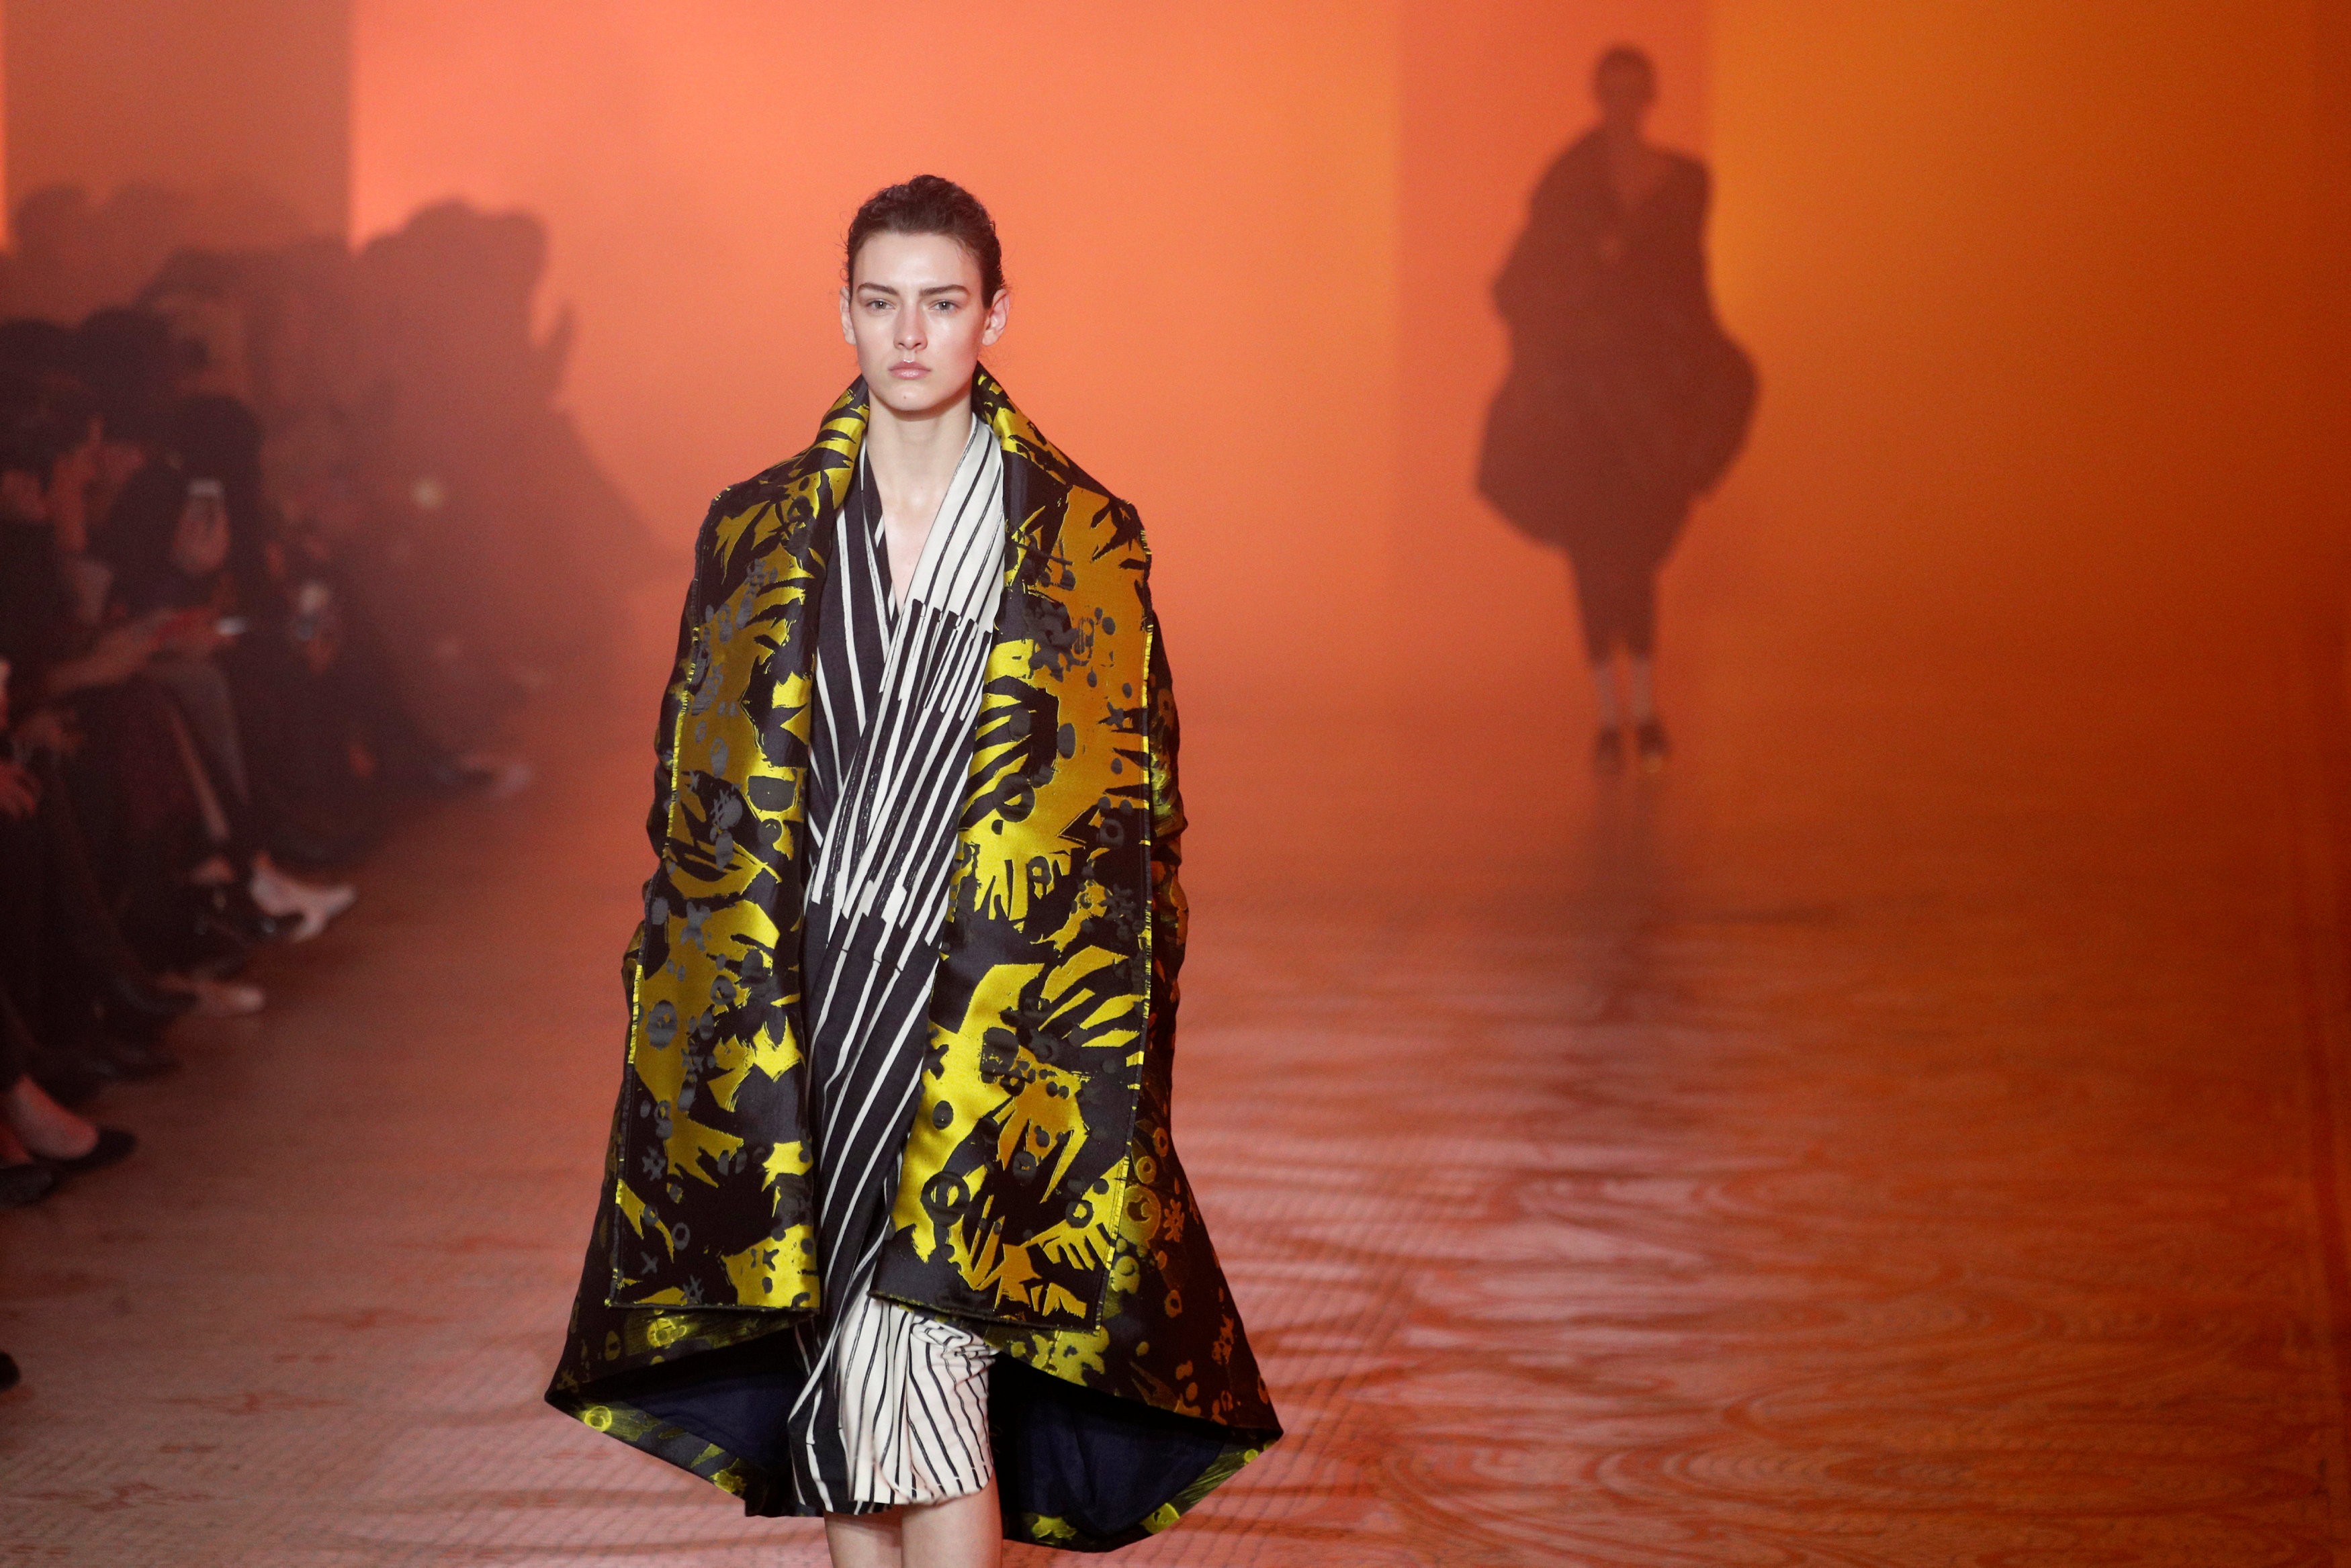 Loose, fluid silhouettes dominate the runway in this incredible comeback